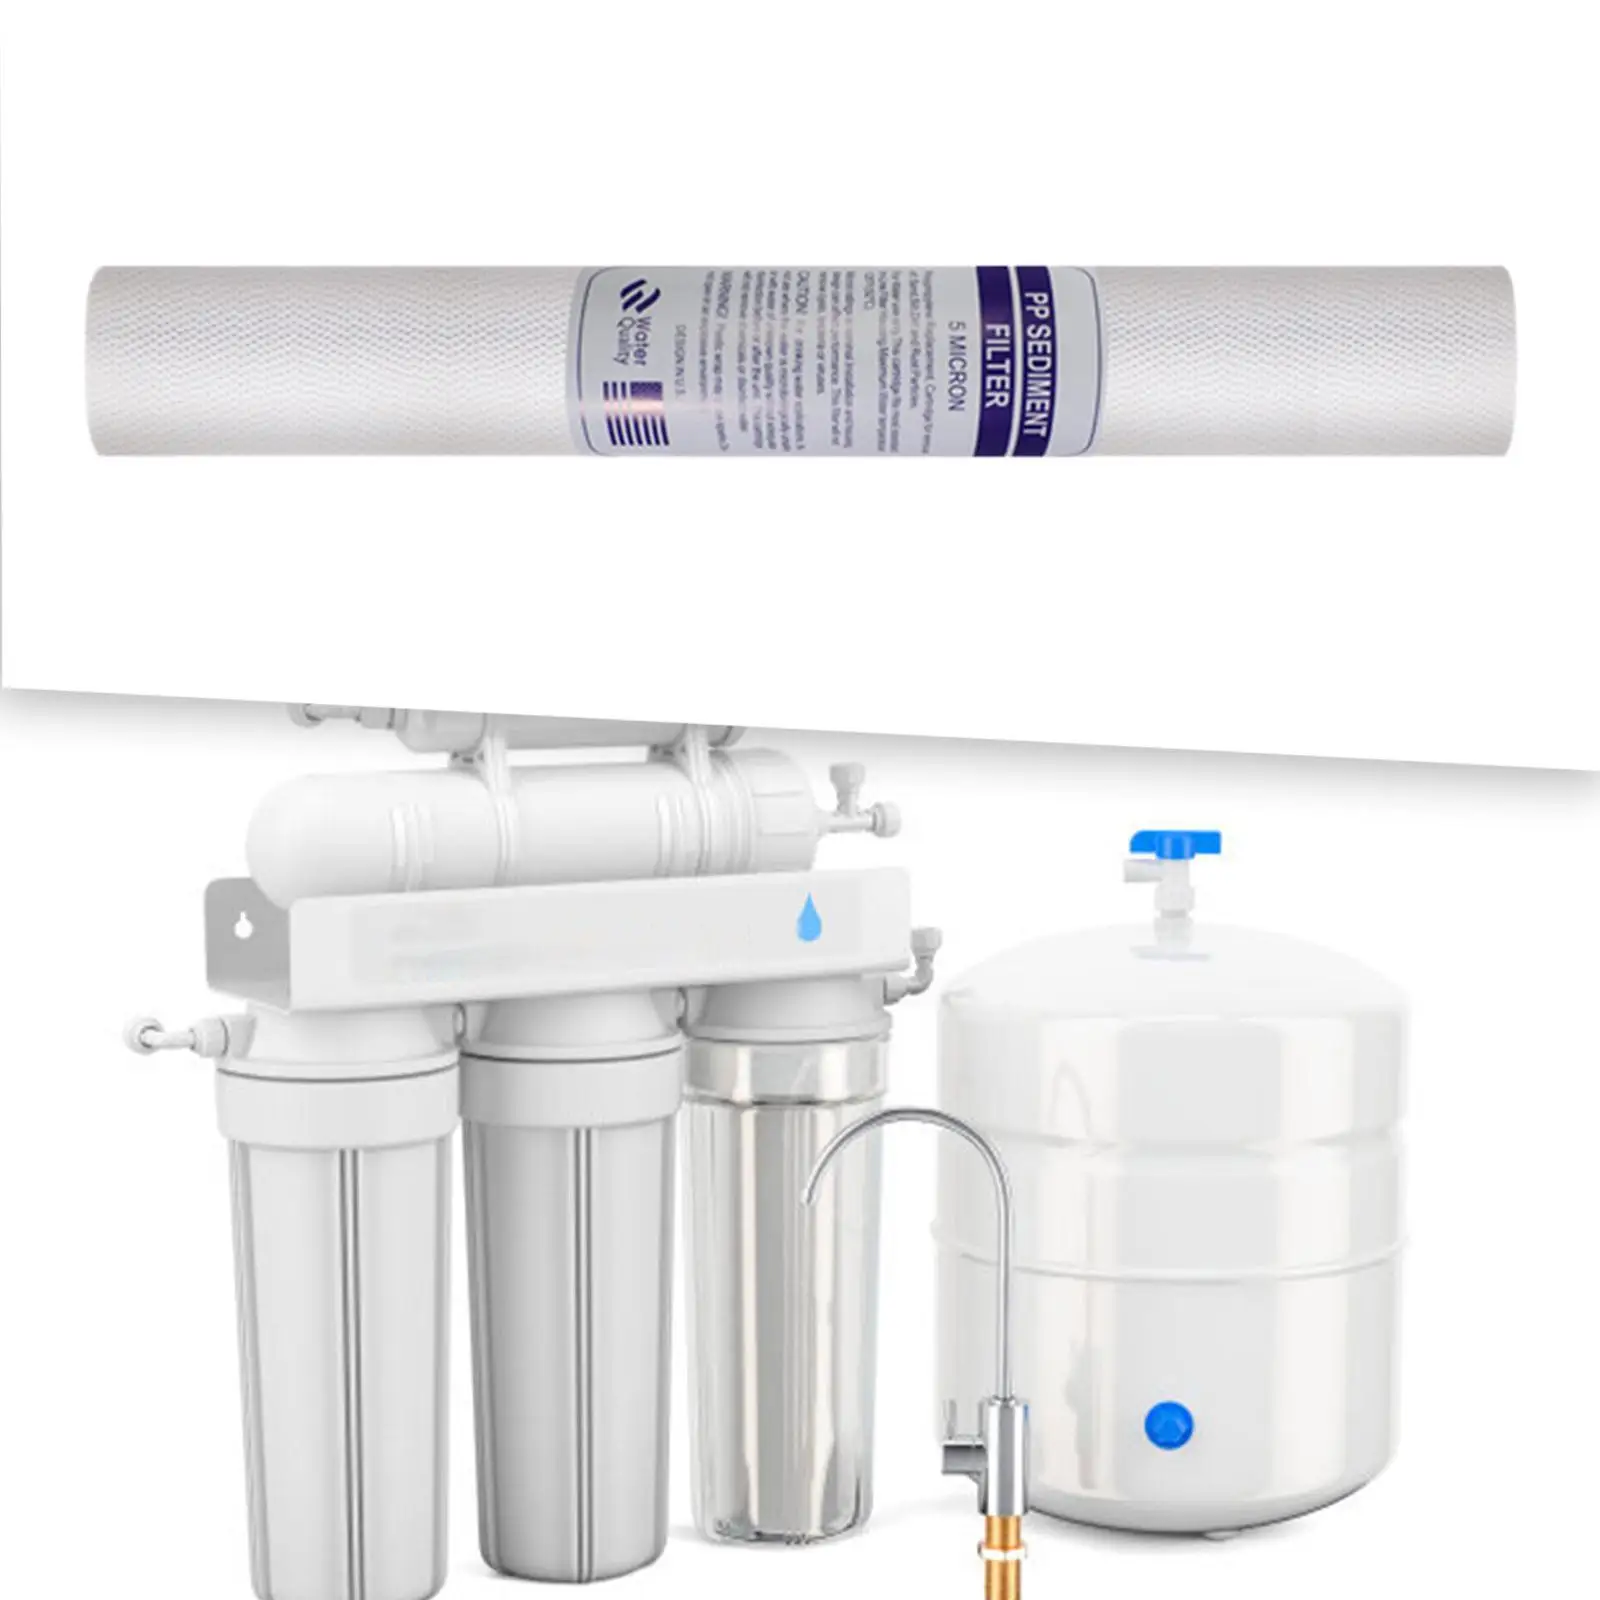 3Pcs Polypropylene Filter Universal Replacement Sediment Water Filter Whole House Sediment Filtration Easy to Install Durable